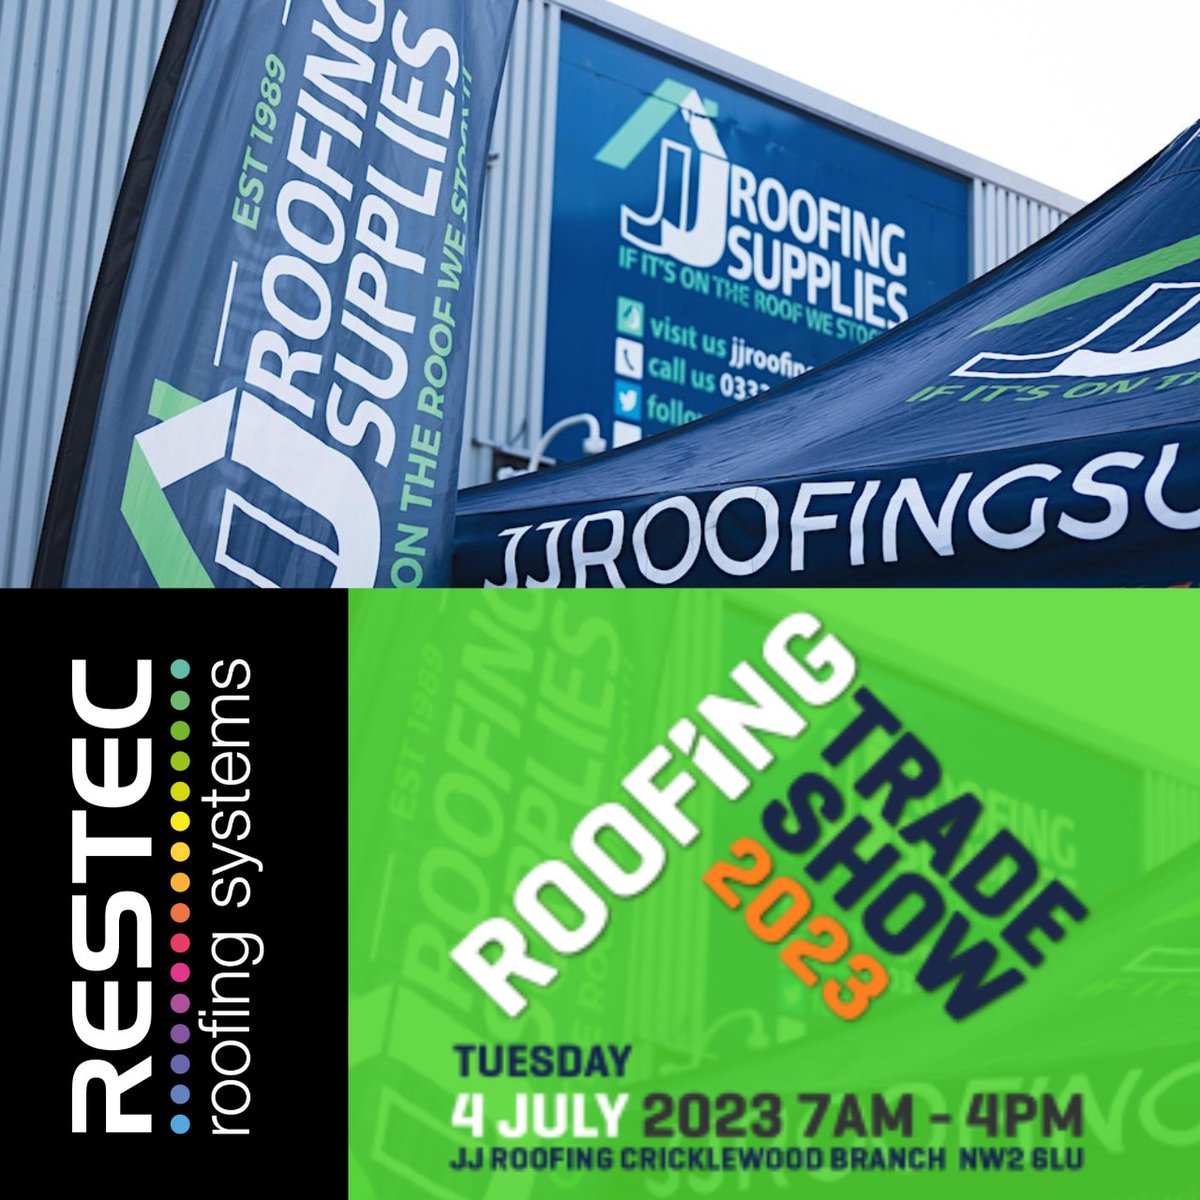 Join us at JJ Roofing Supplies Cricklewood tomorrow at The Roofing Trade Show! 

The Restec team will be there demonstrating the best liquid and roofing systems on the market, giving you chance to experience our products first hand, including our new anti-slip coating #RESGRIP 🚀